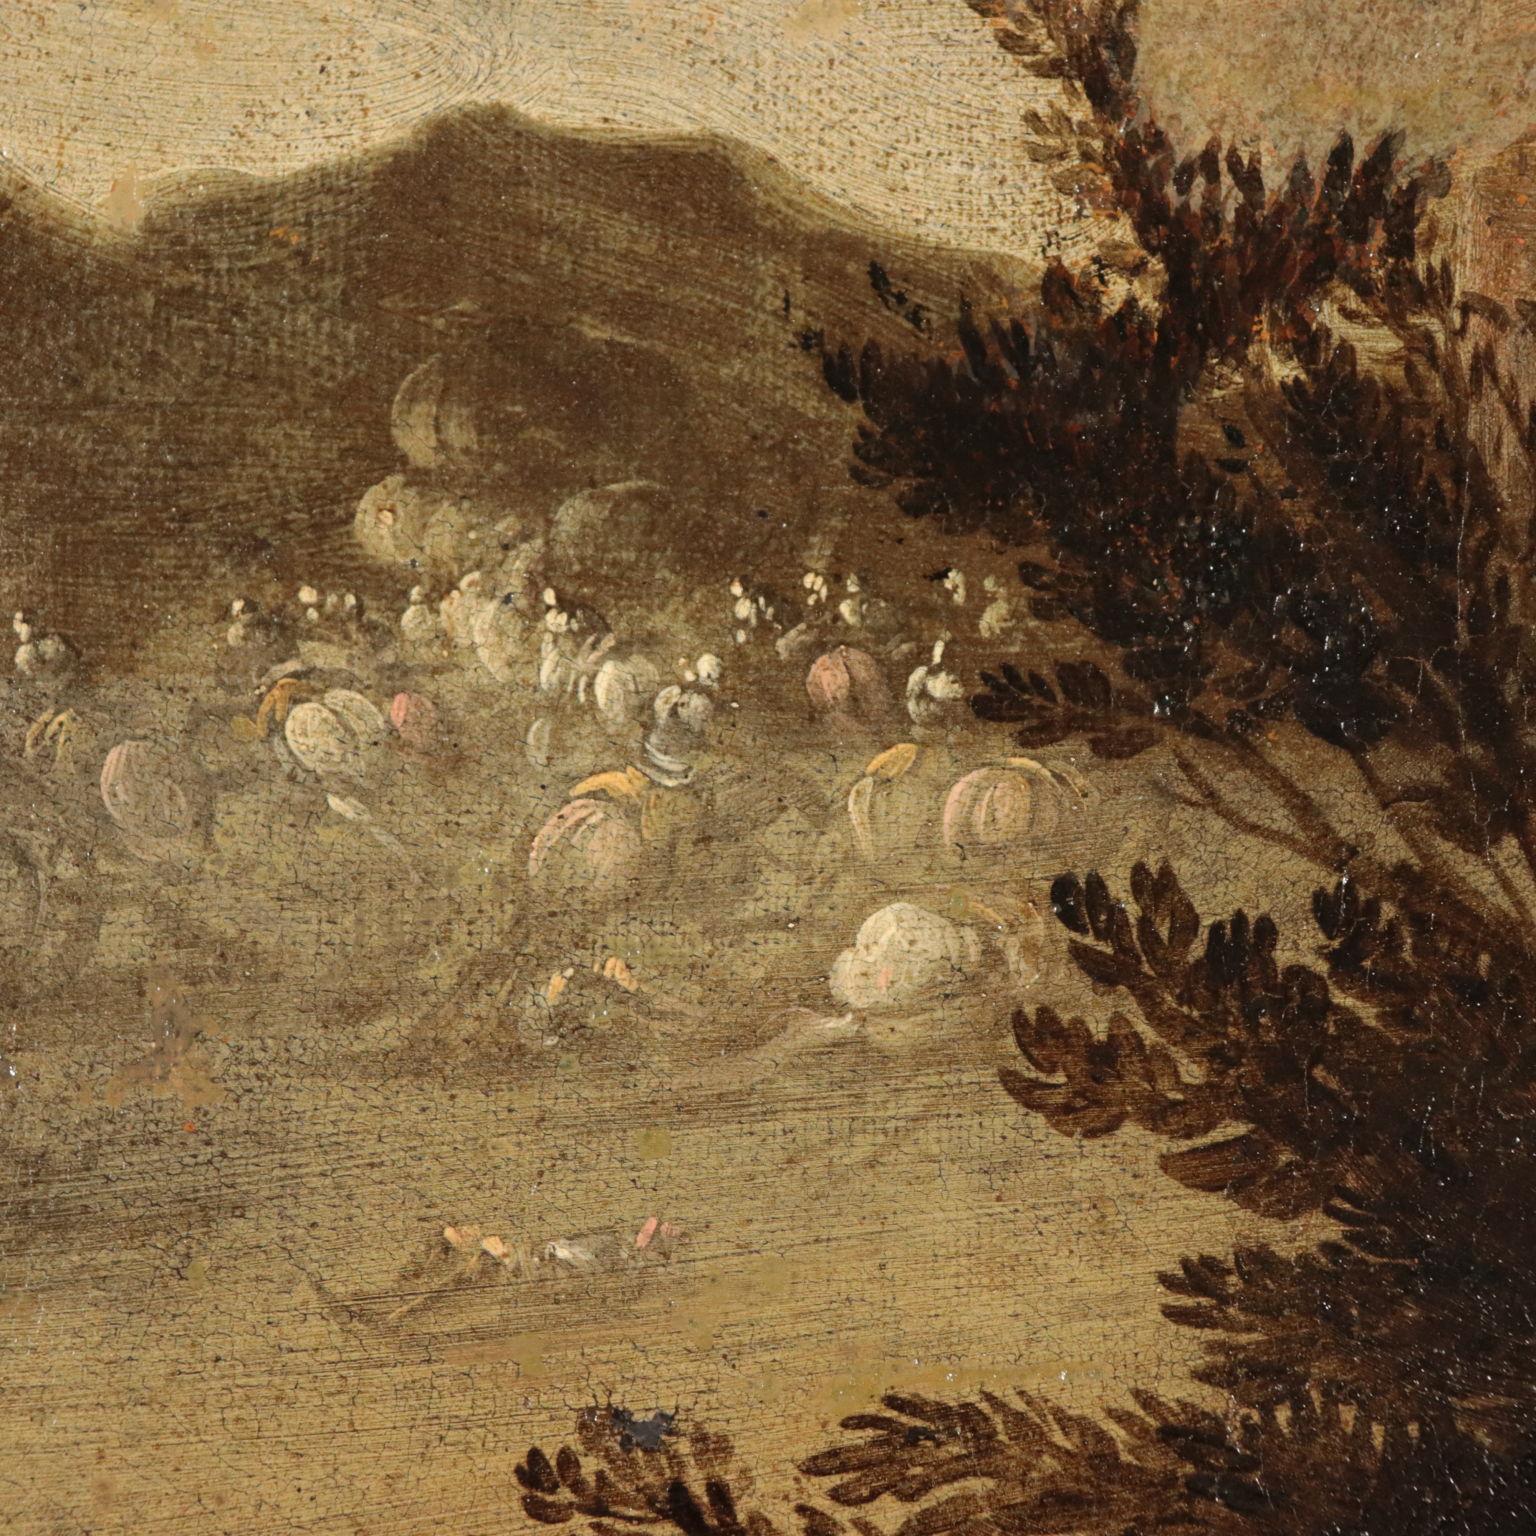 Oil on canvas. Neapolitan school. The scene focuses on a particular moment of the battle, represented on the left background as a cloud of dust that cover men fighting in a barren mountain landscape; the right side is occupied by the drama of some